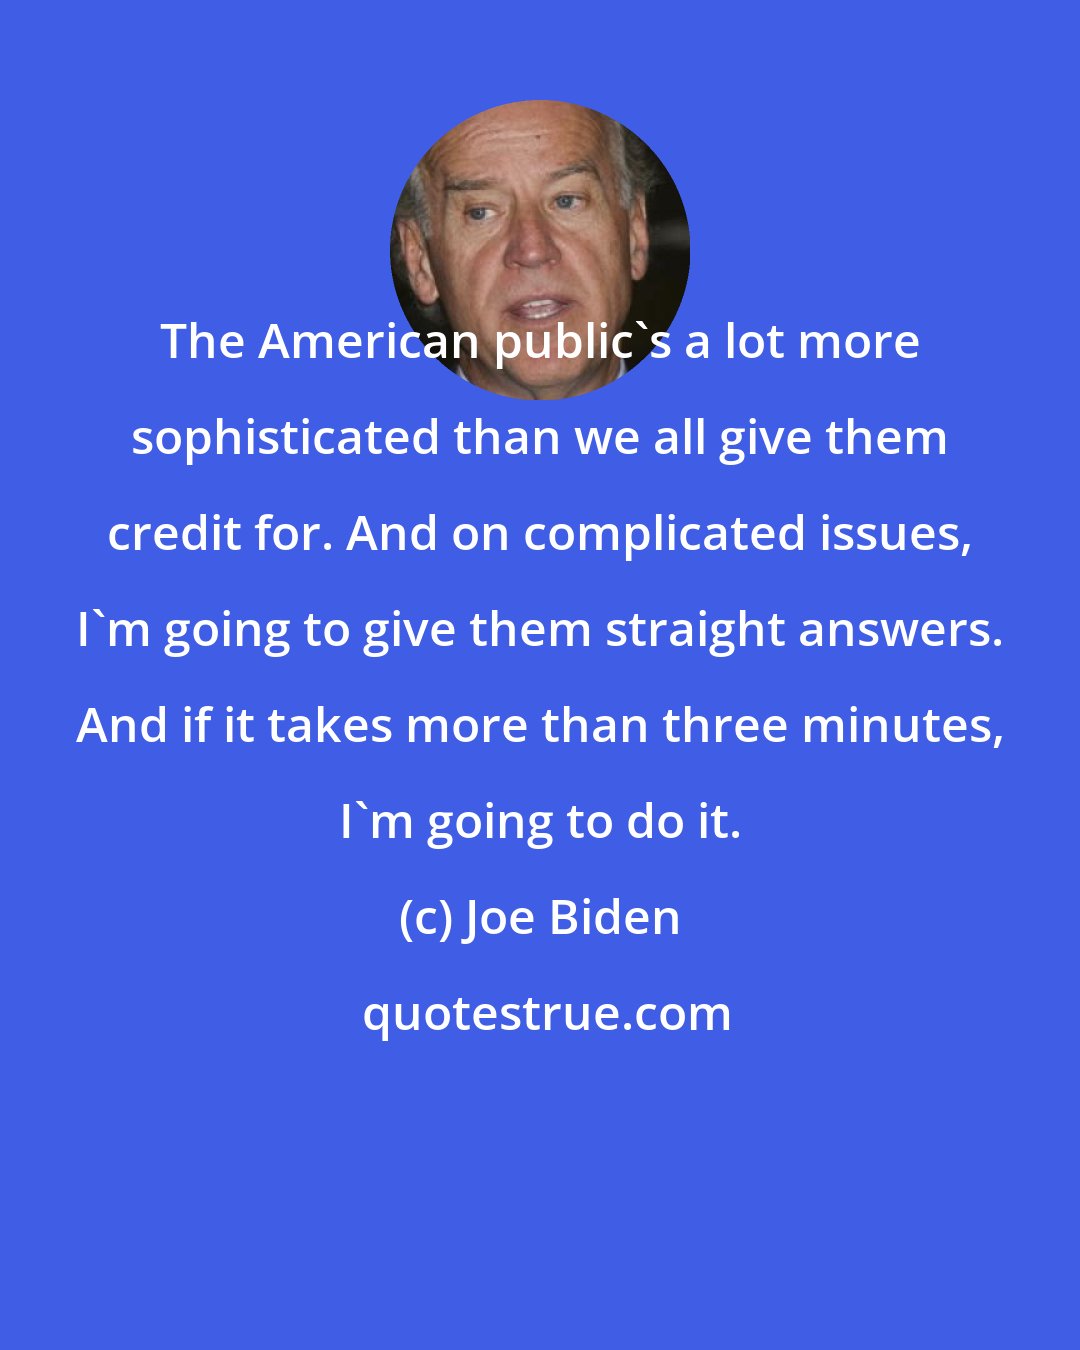 Joe Biden: The American public's a lot more sophisticated than we all give them credit for. And on complicated issues, I'm going to give them straight answers. And if it takes more than three minutes, I'm going to do it.